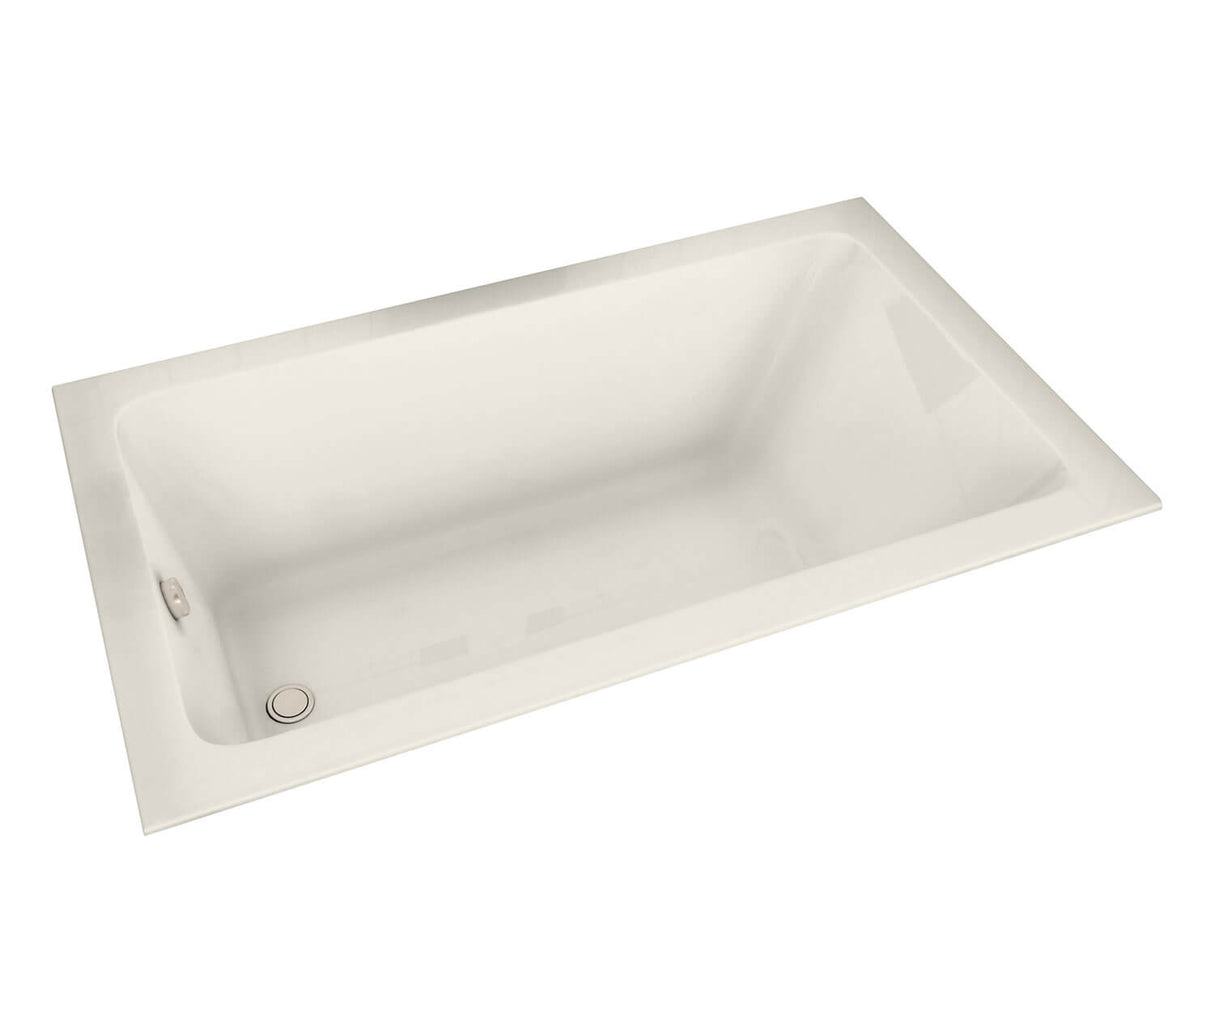 MAAX 101461-000-007 Pose 7242 Acrylic Drop-in End Drain Bathtub in Biscuit